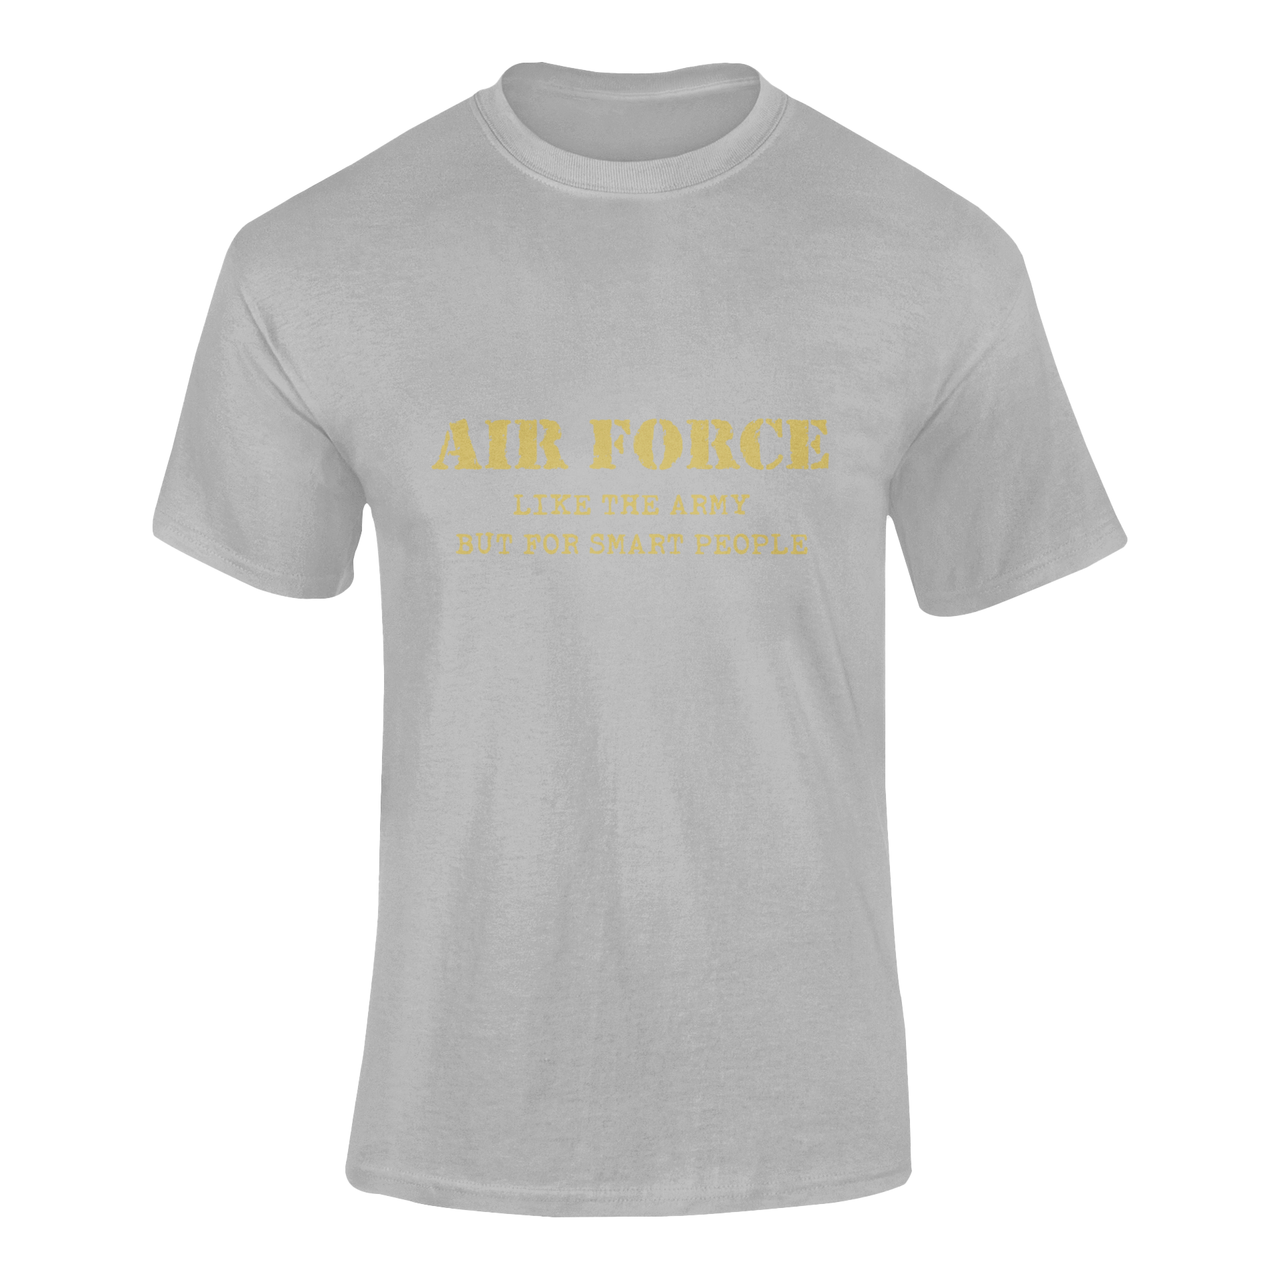 Military T-shirt - Air Force Like The Army But..... (Men)